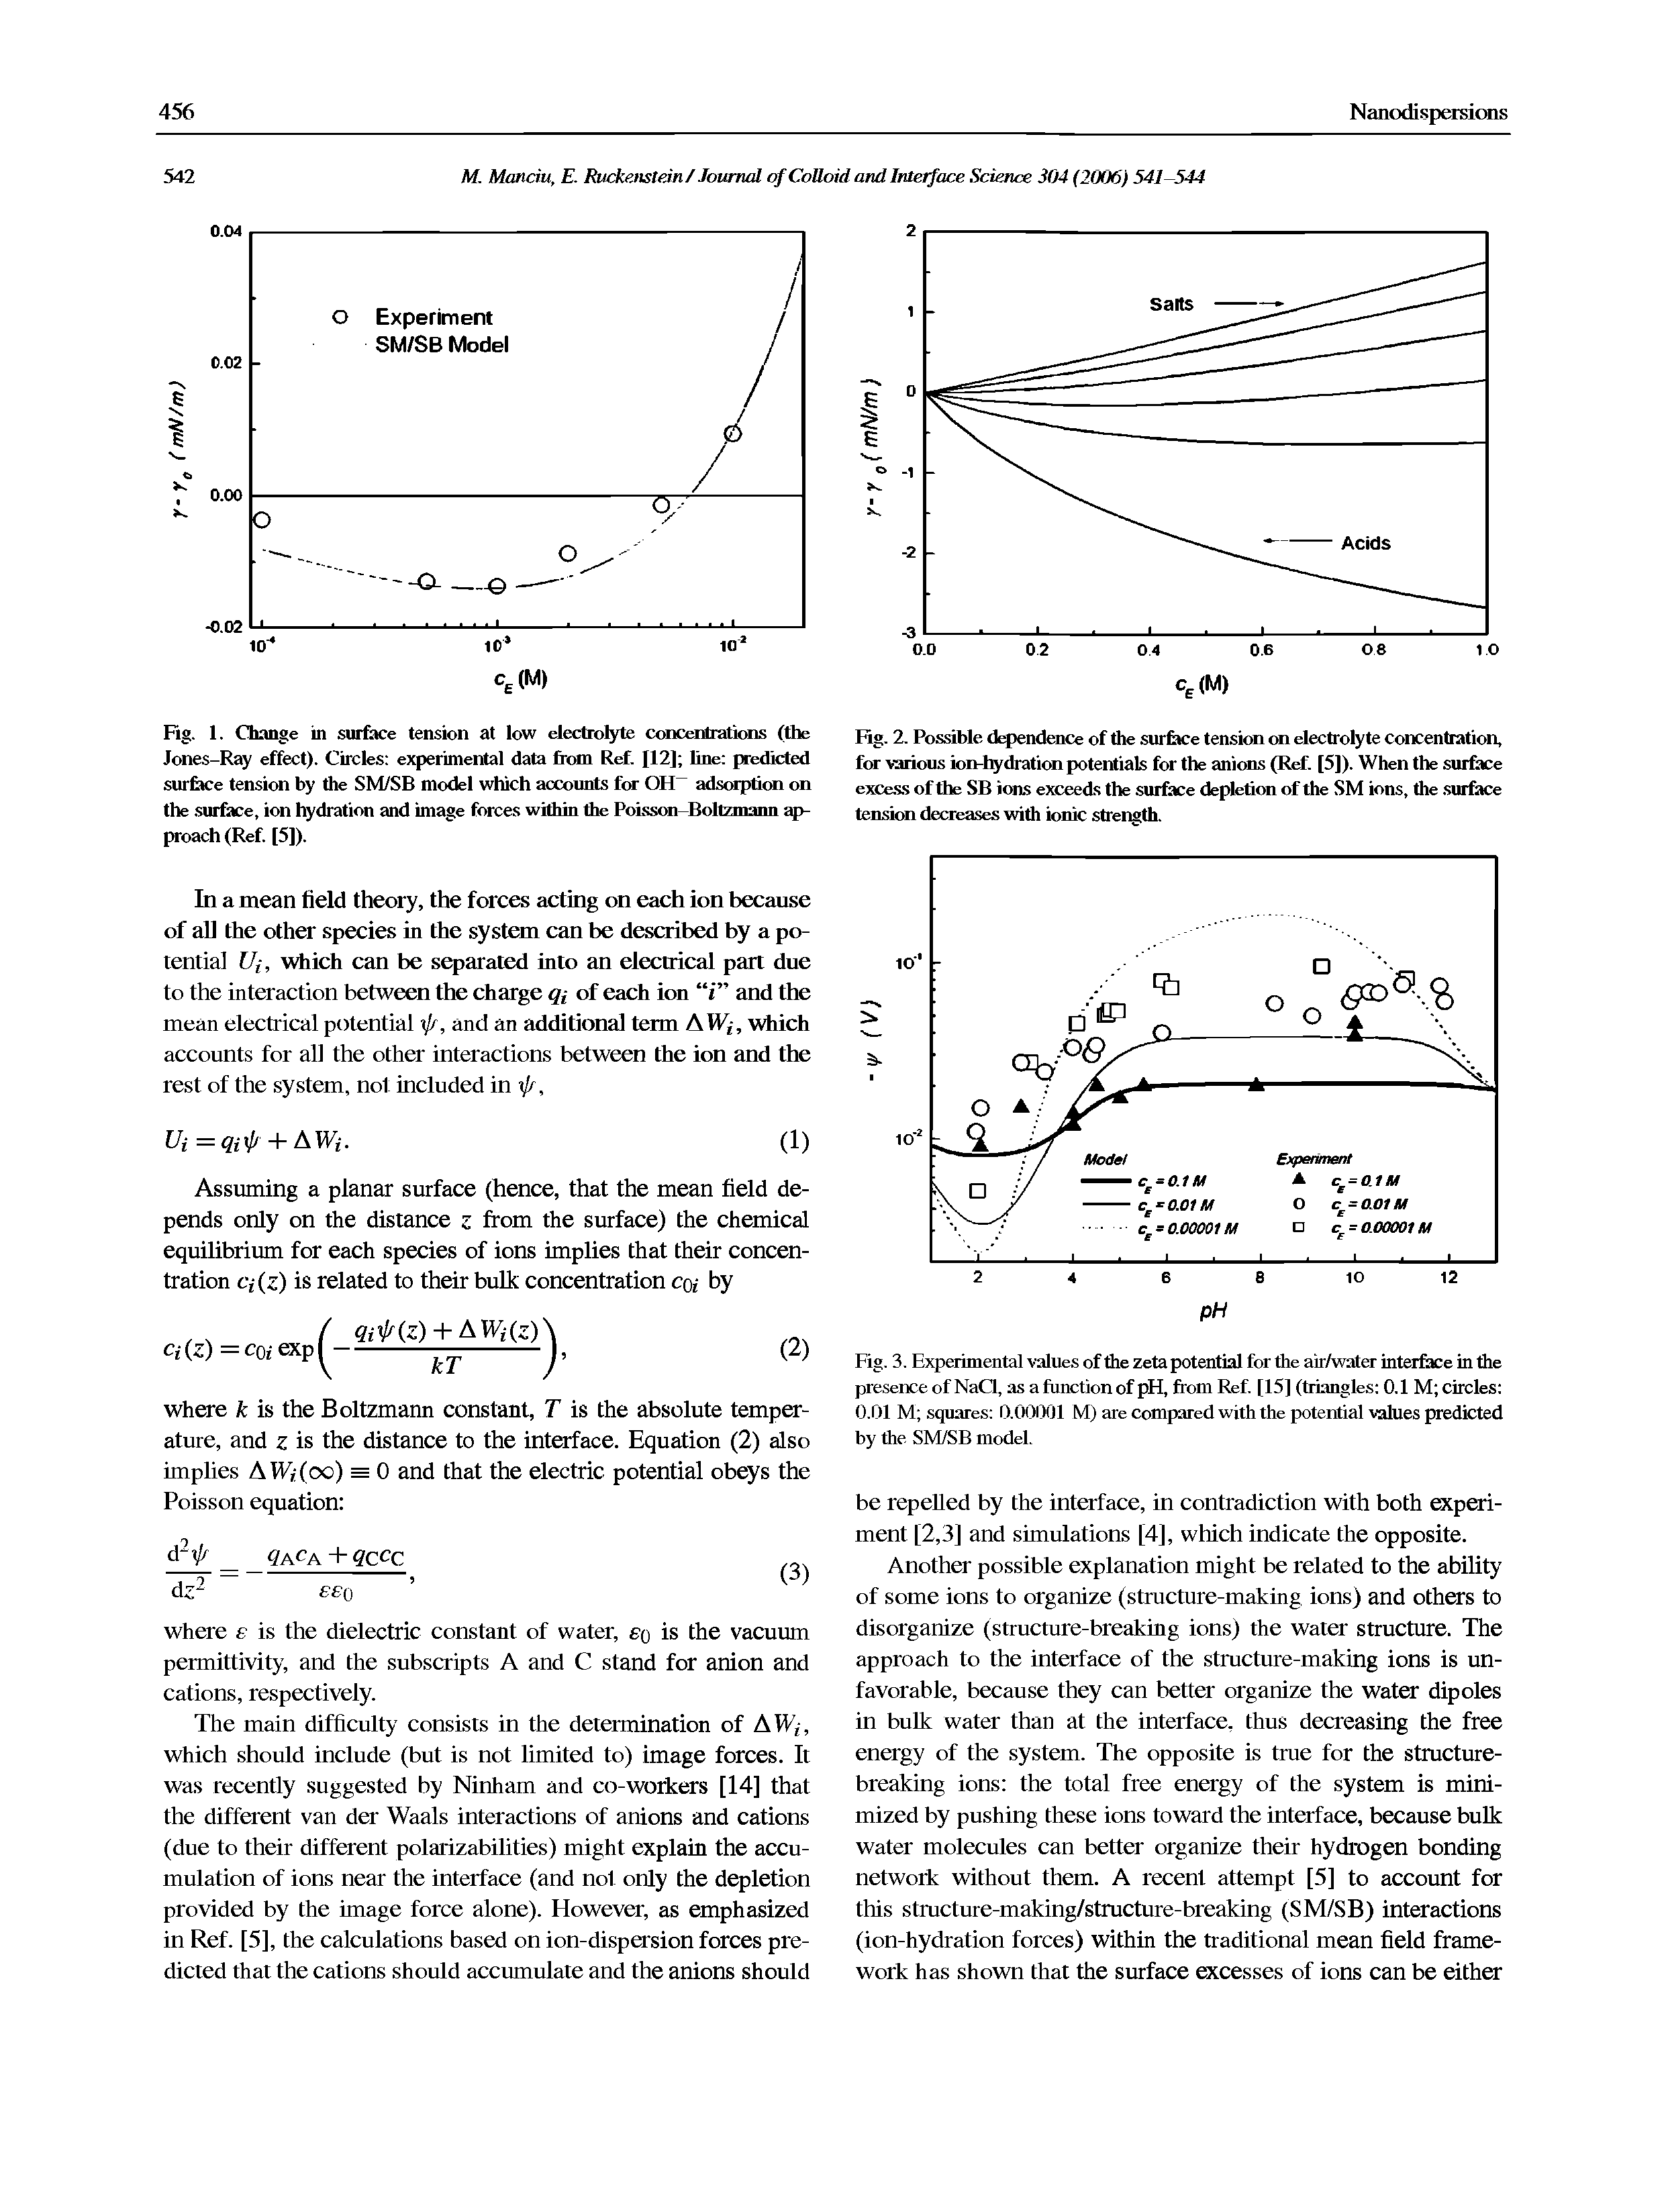 Fig. 2. Possible dependence of the surface tension on electrolyte concentration, for various ion-hydration potentials for the anions (Ref. [5]). When the surface excess of the SB ions exceeds the surface depletion of the SM ions, the surface tension decreases with ionic strength.